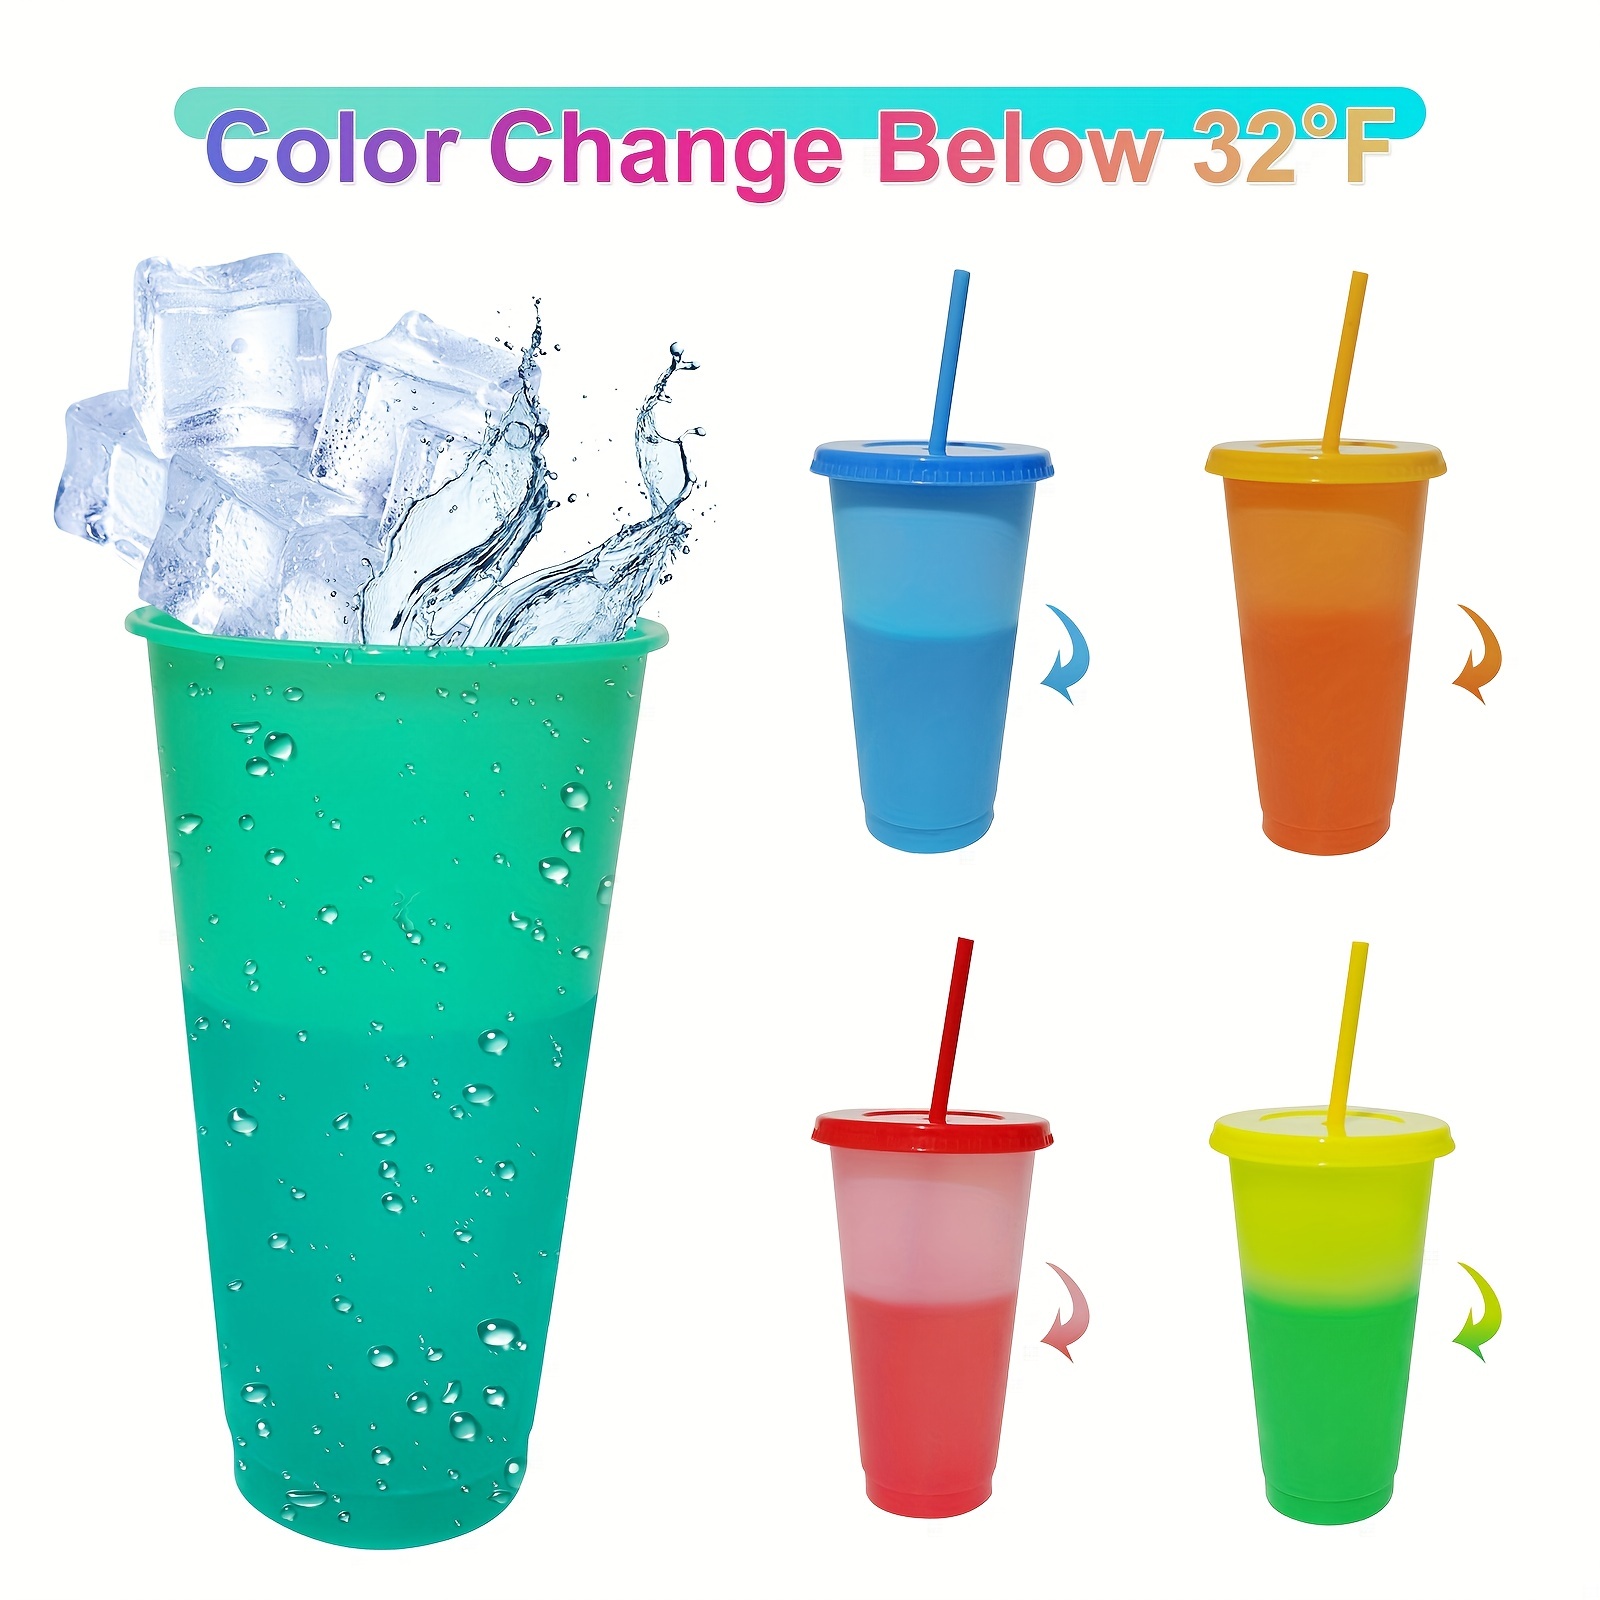 Cups with Lids and Straws - 17 oz Plastic Tumblers with Lids and Straws Bulk, Kids Cups with Straws and Lids for Girls Boys Party Smoothie, Reusable